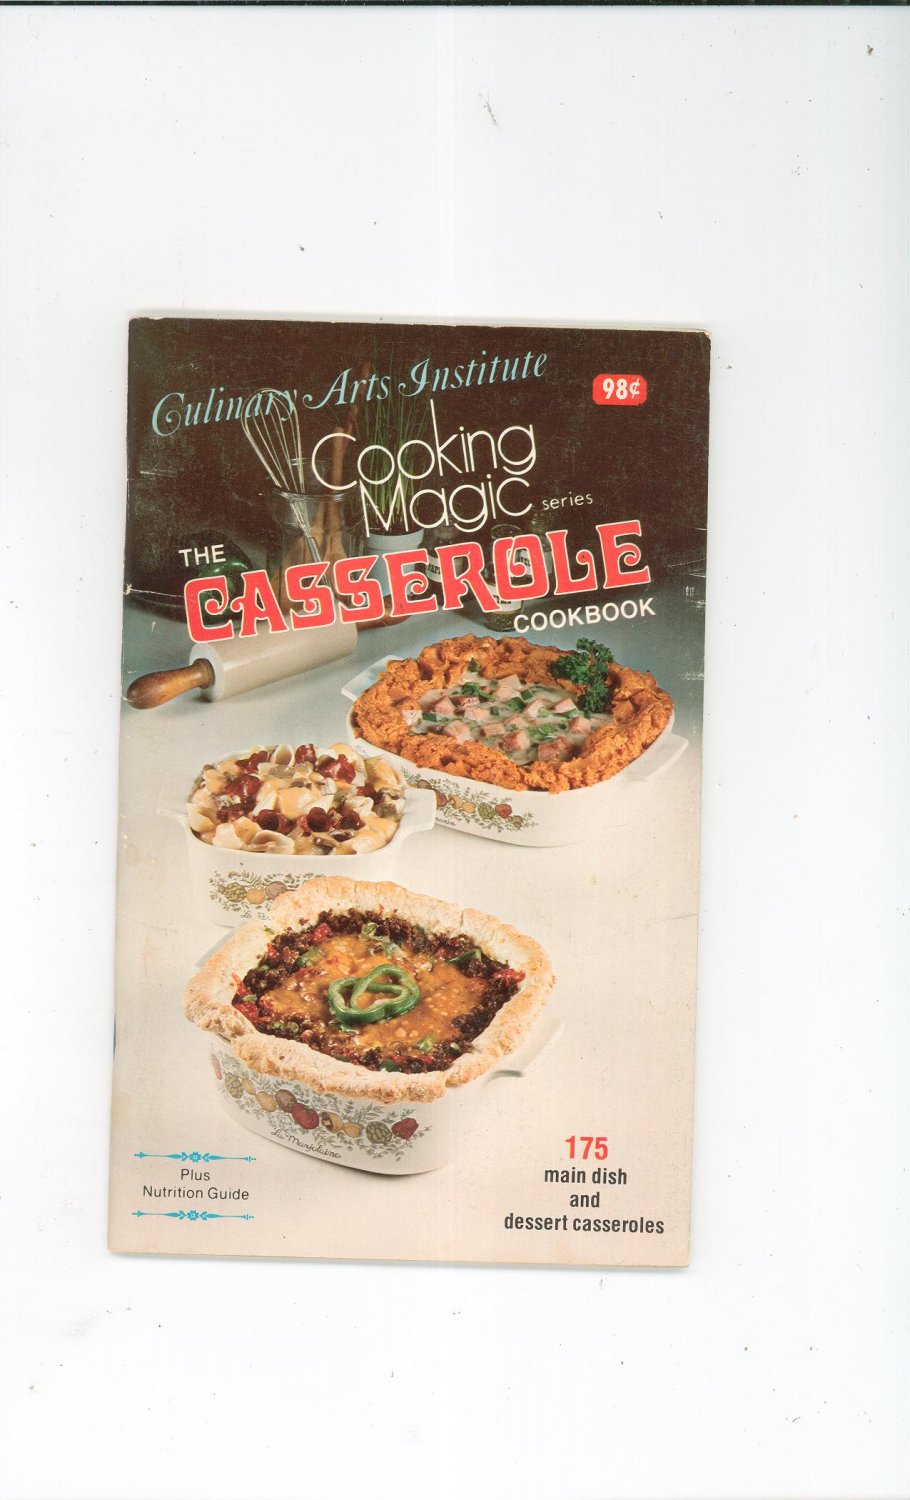 Cooking Magic Series The Casserole Cookbook by Culinary Arts Institute Vintage